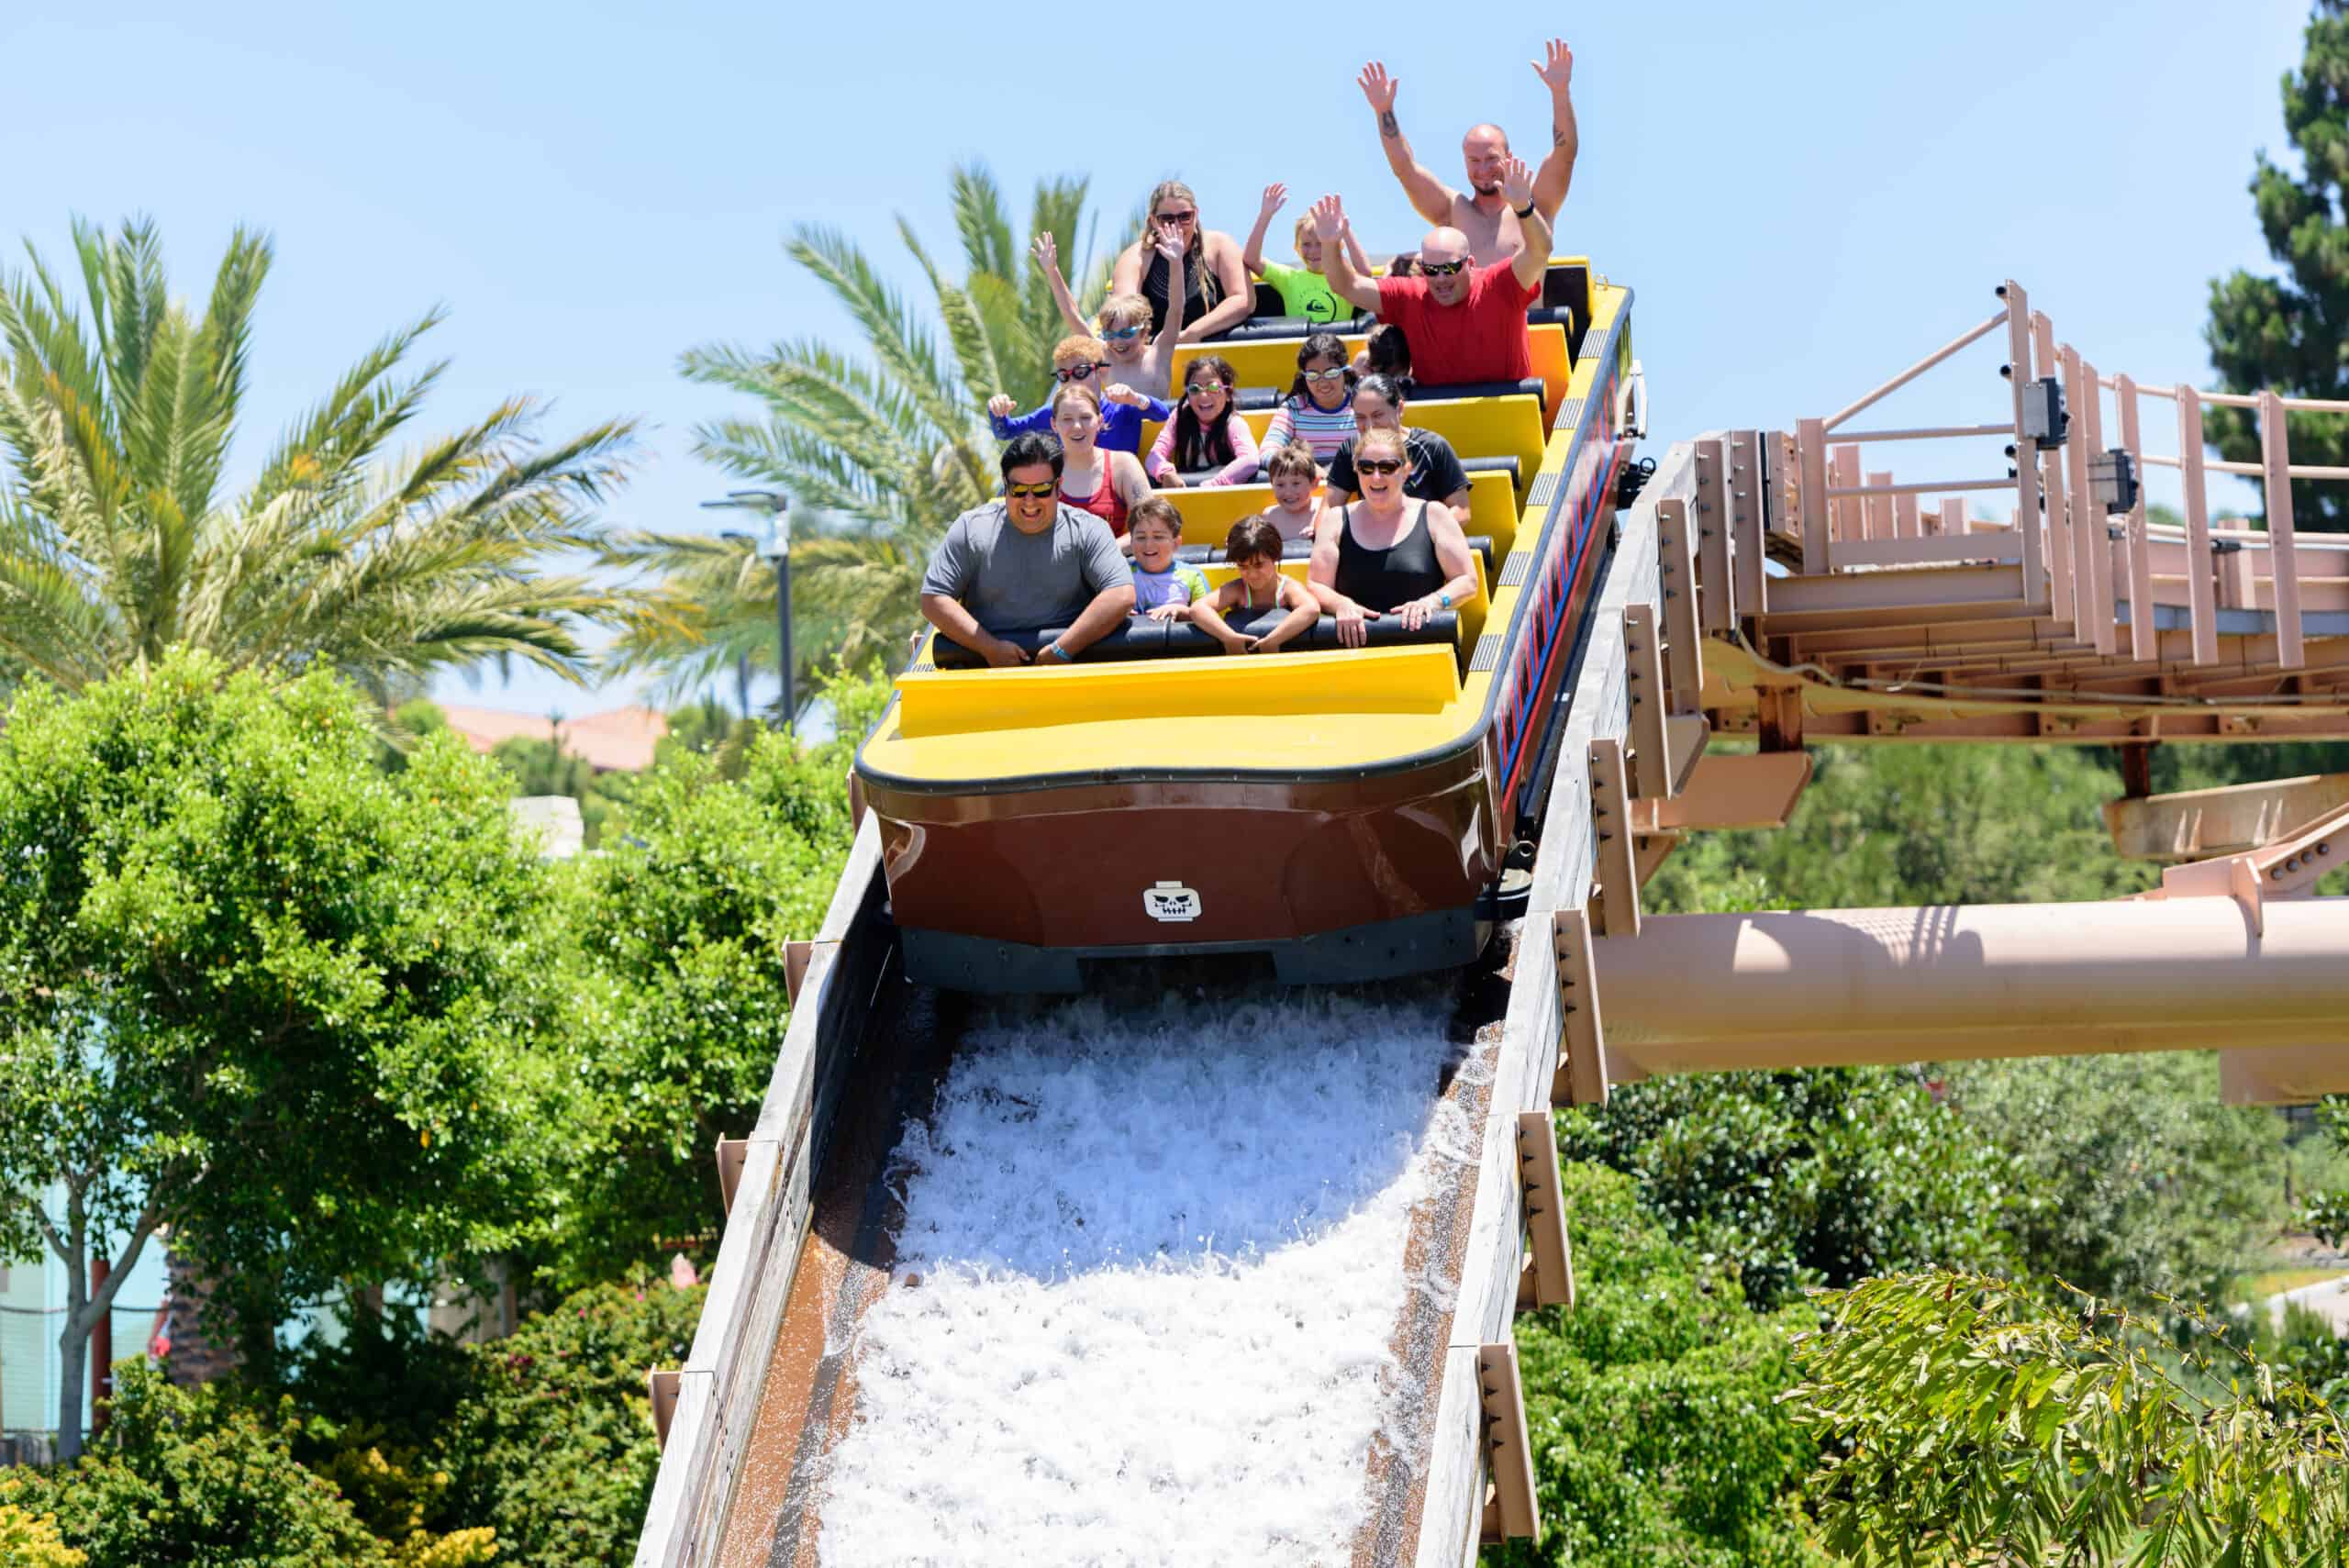 Pirates Reef is one of the best water rides at Legoland in California